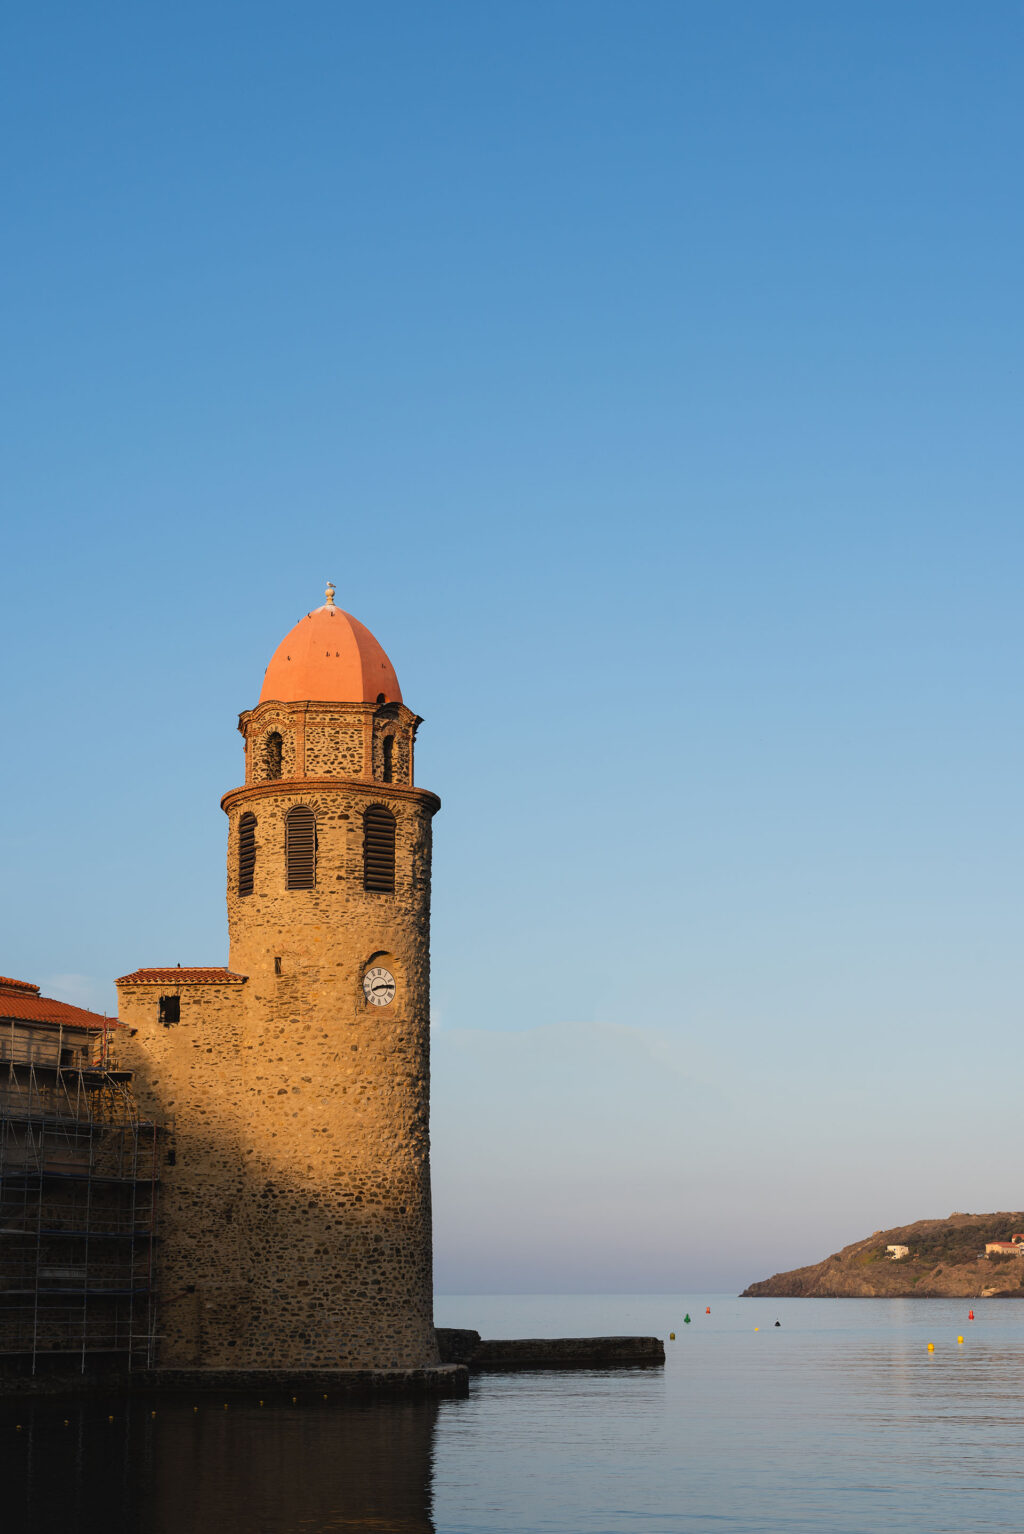 View of Our Lady of the Angels Church in Collioure, France